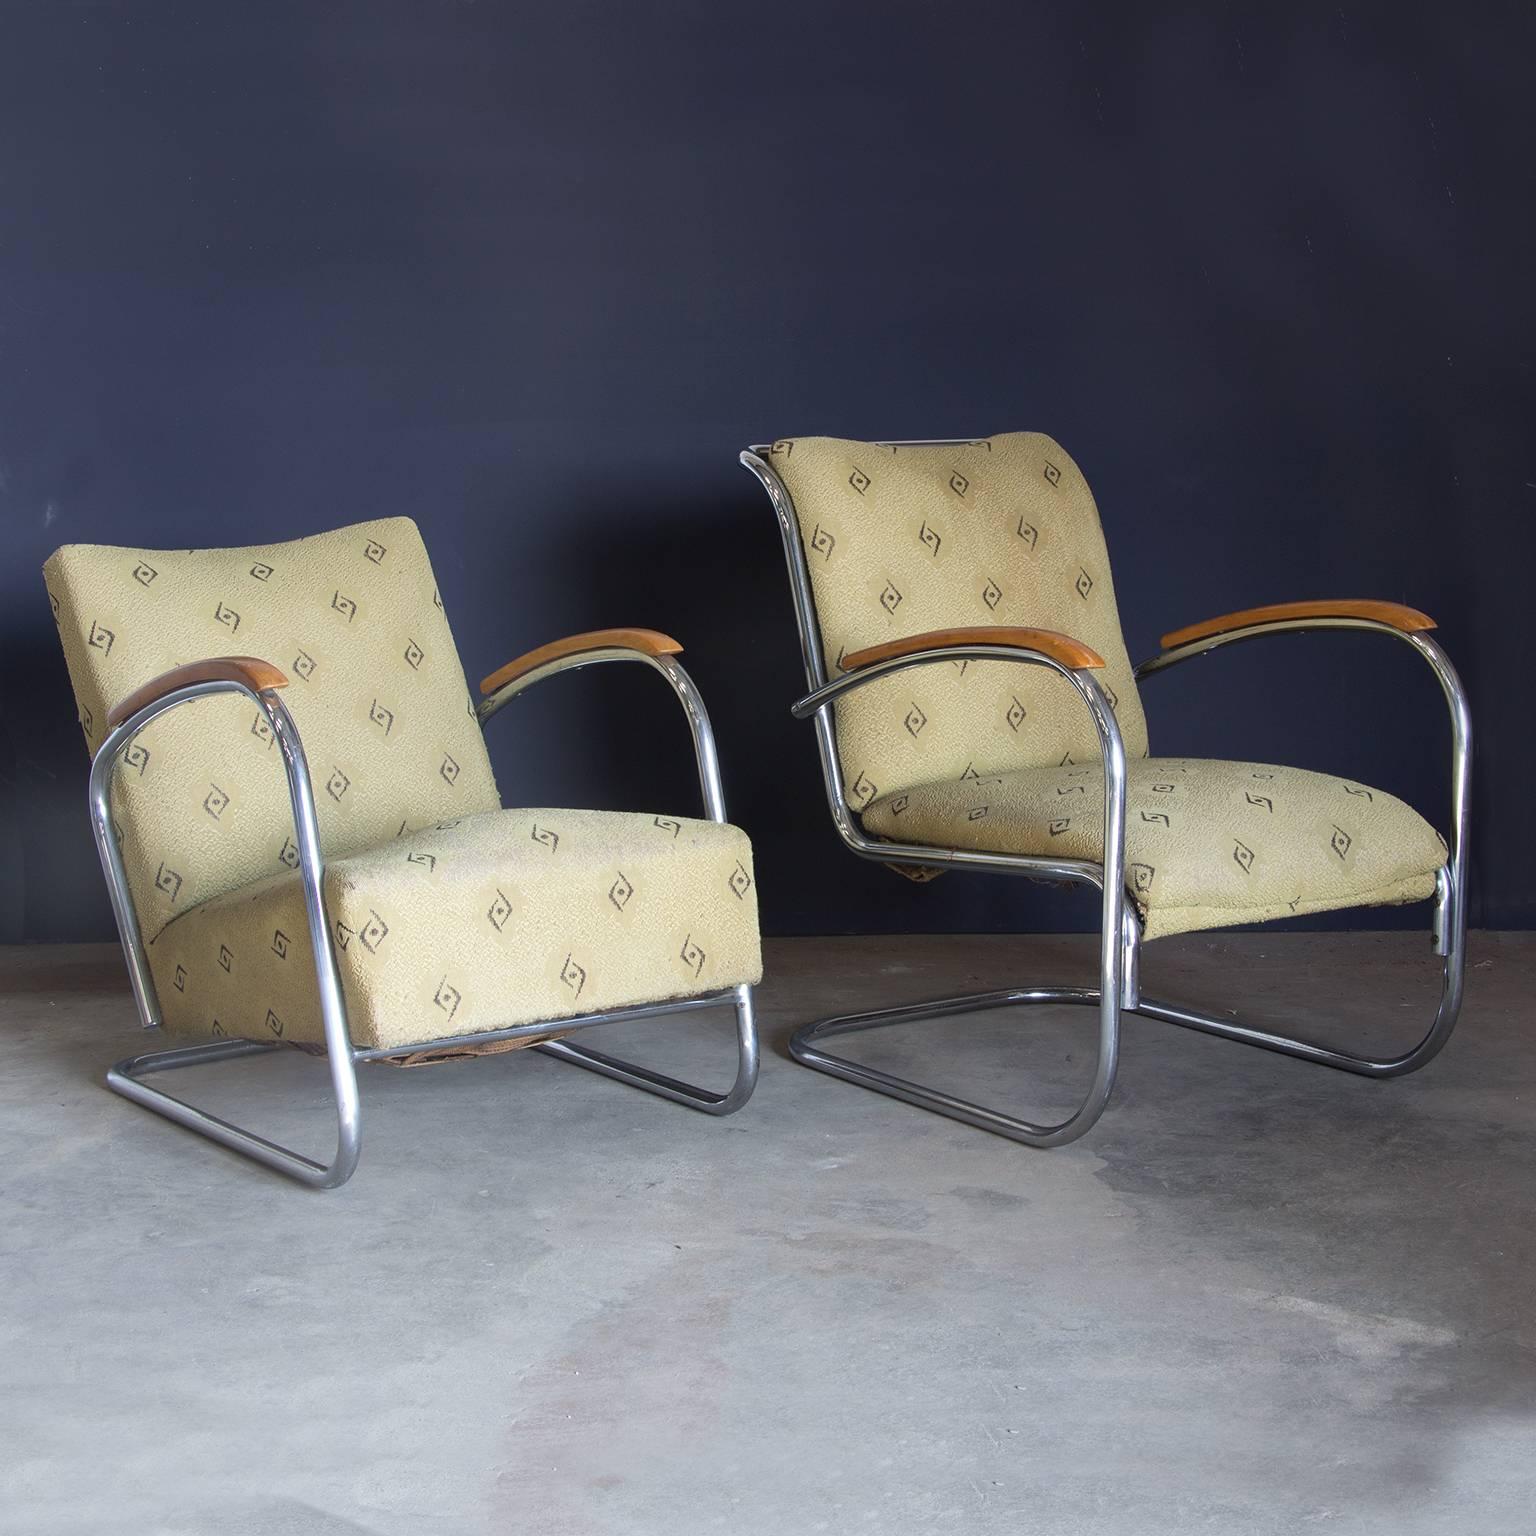 Original, Early Vintage Tubular Easy Chair with Original Fabric, circa 1930 For Sale 3